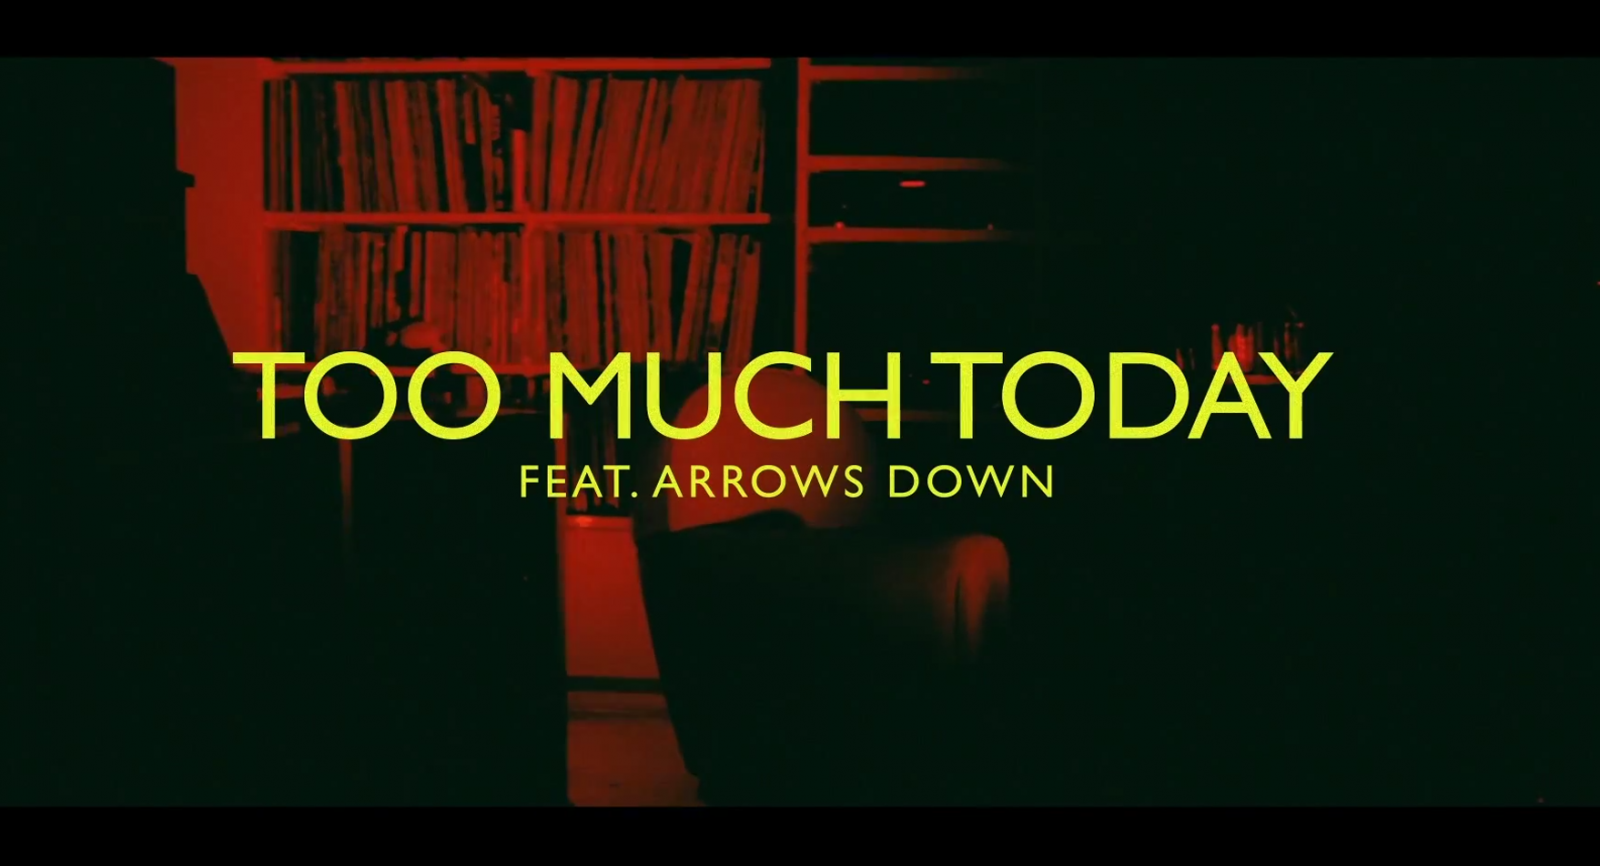 [Video] Jim The Poltergeist – Too Much Today